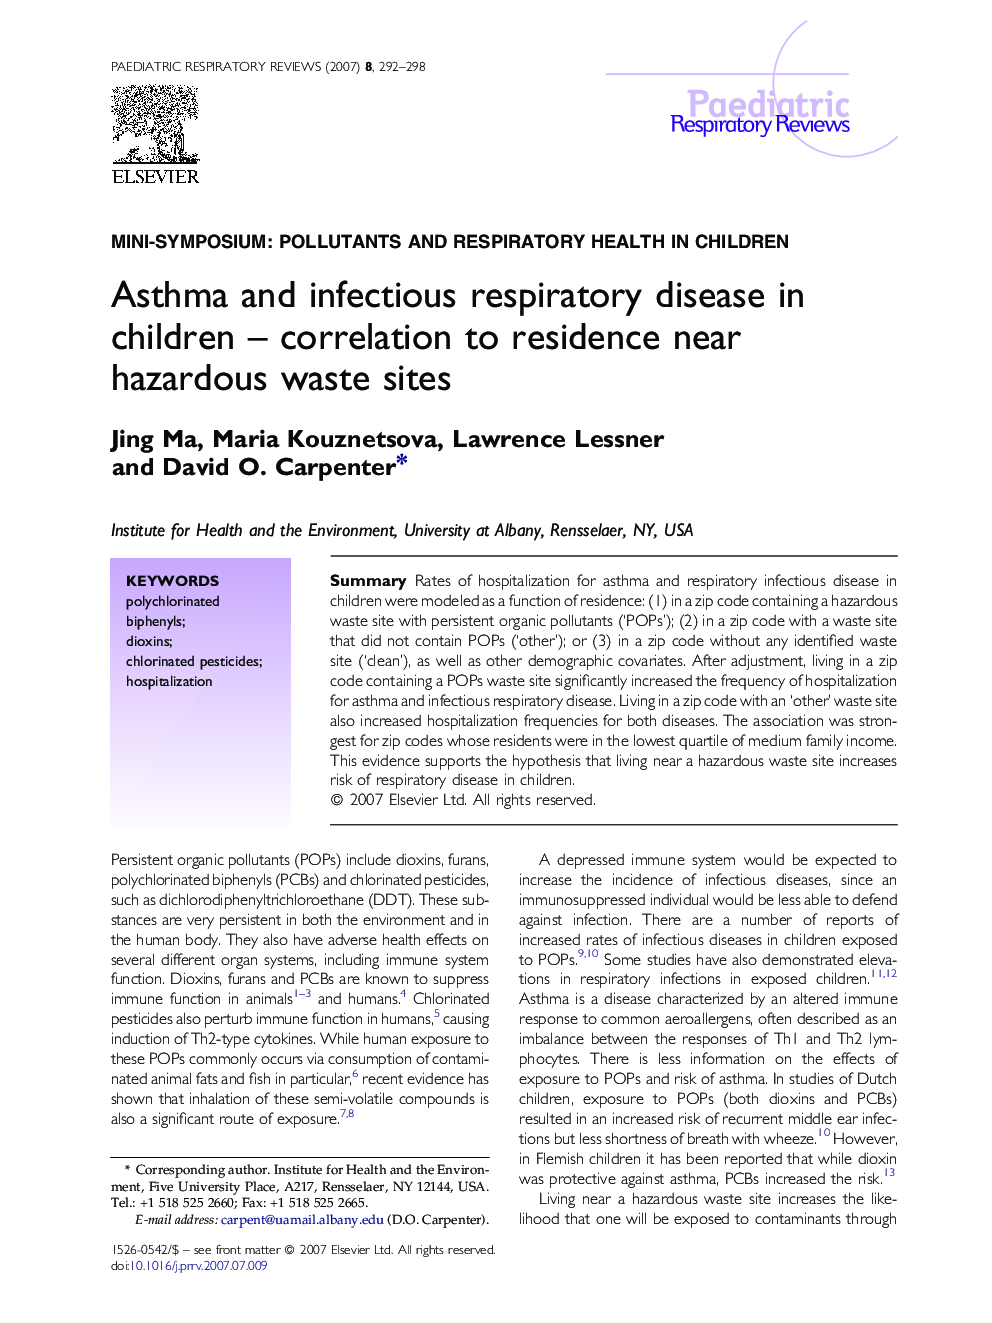 Asthma and infectious respiratory disease in children – correlation to residence near hazardous waste sites